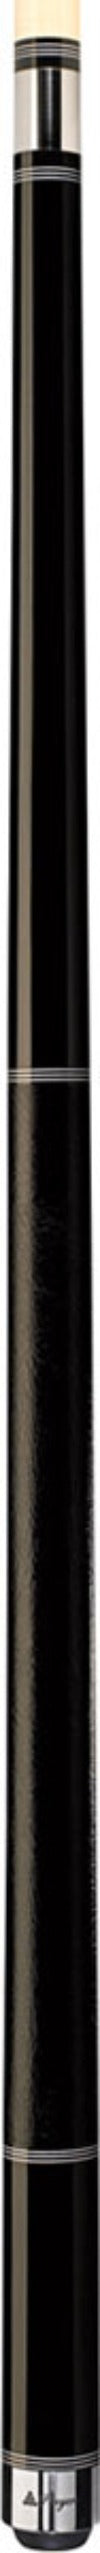 Players C-970 Pool Cue -Players